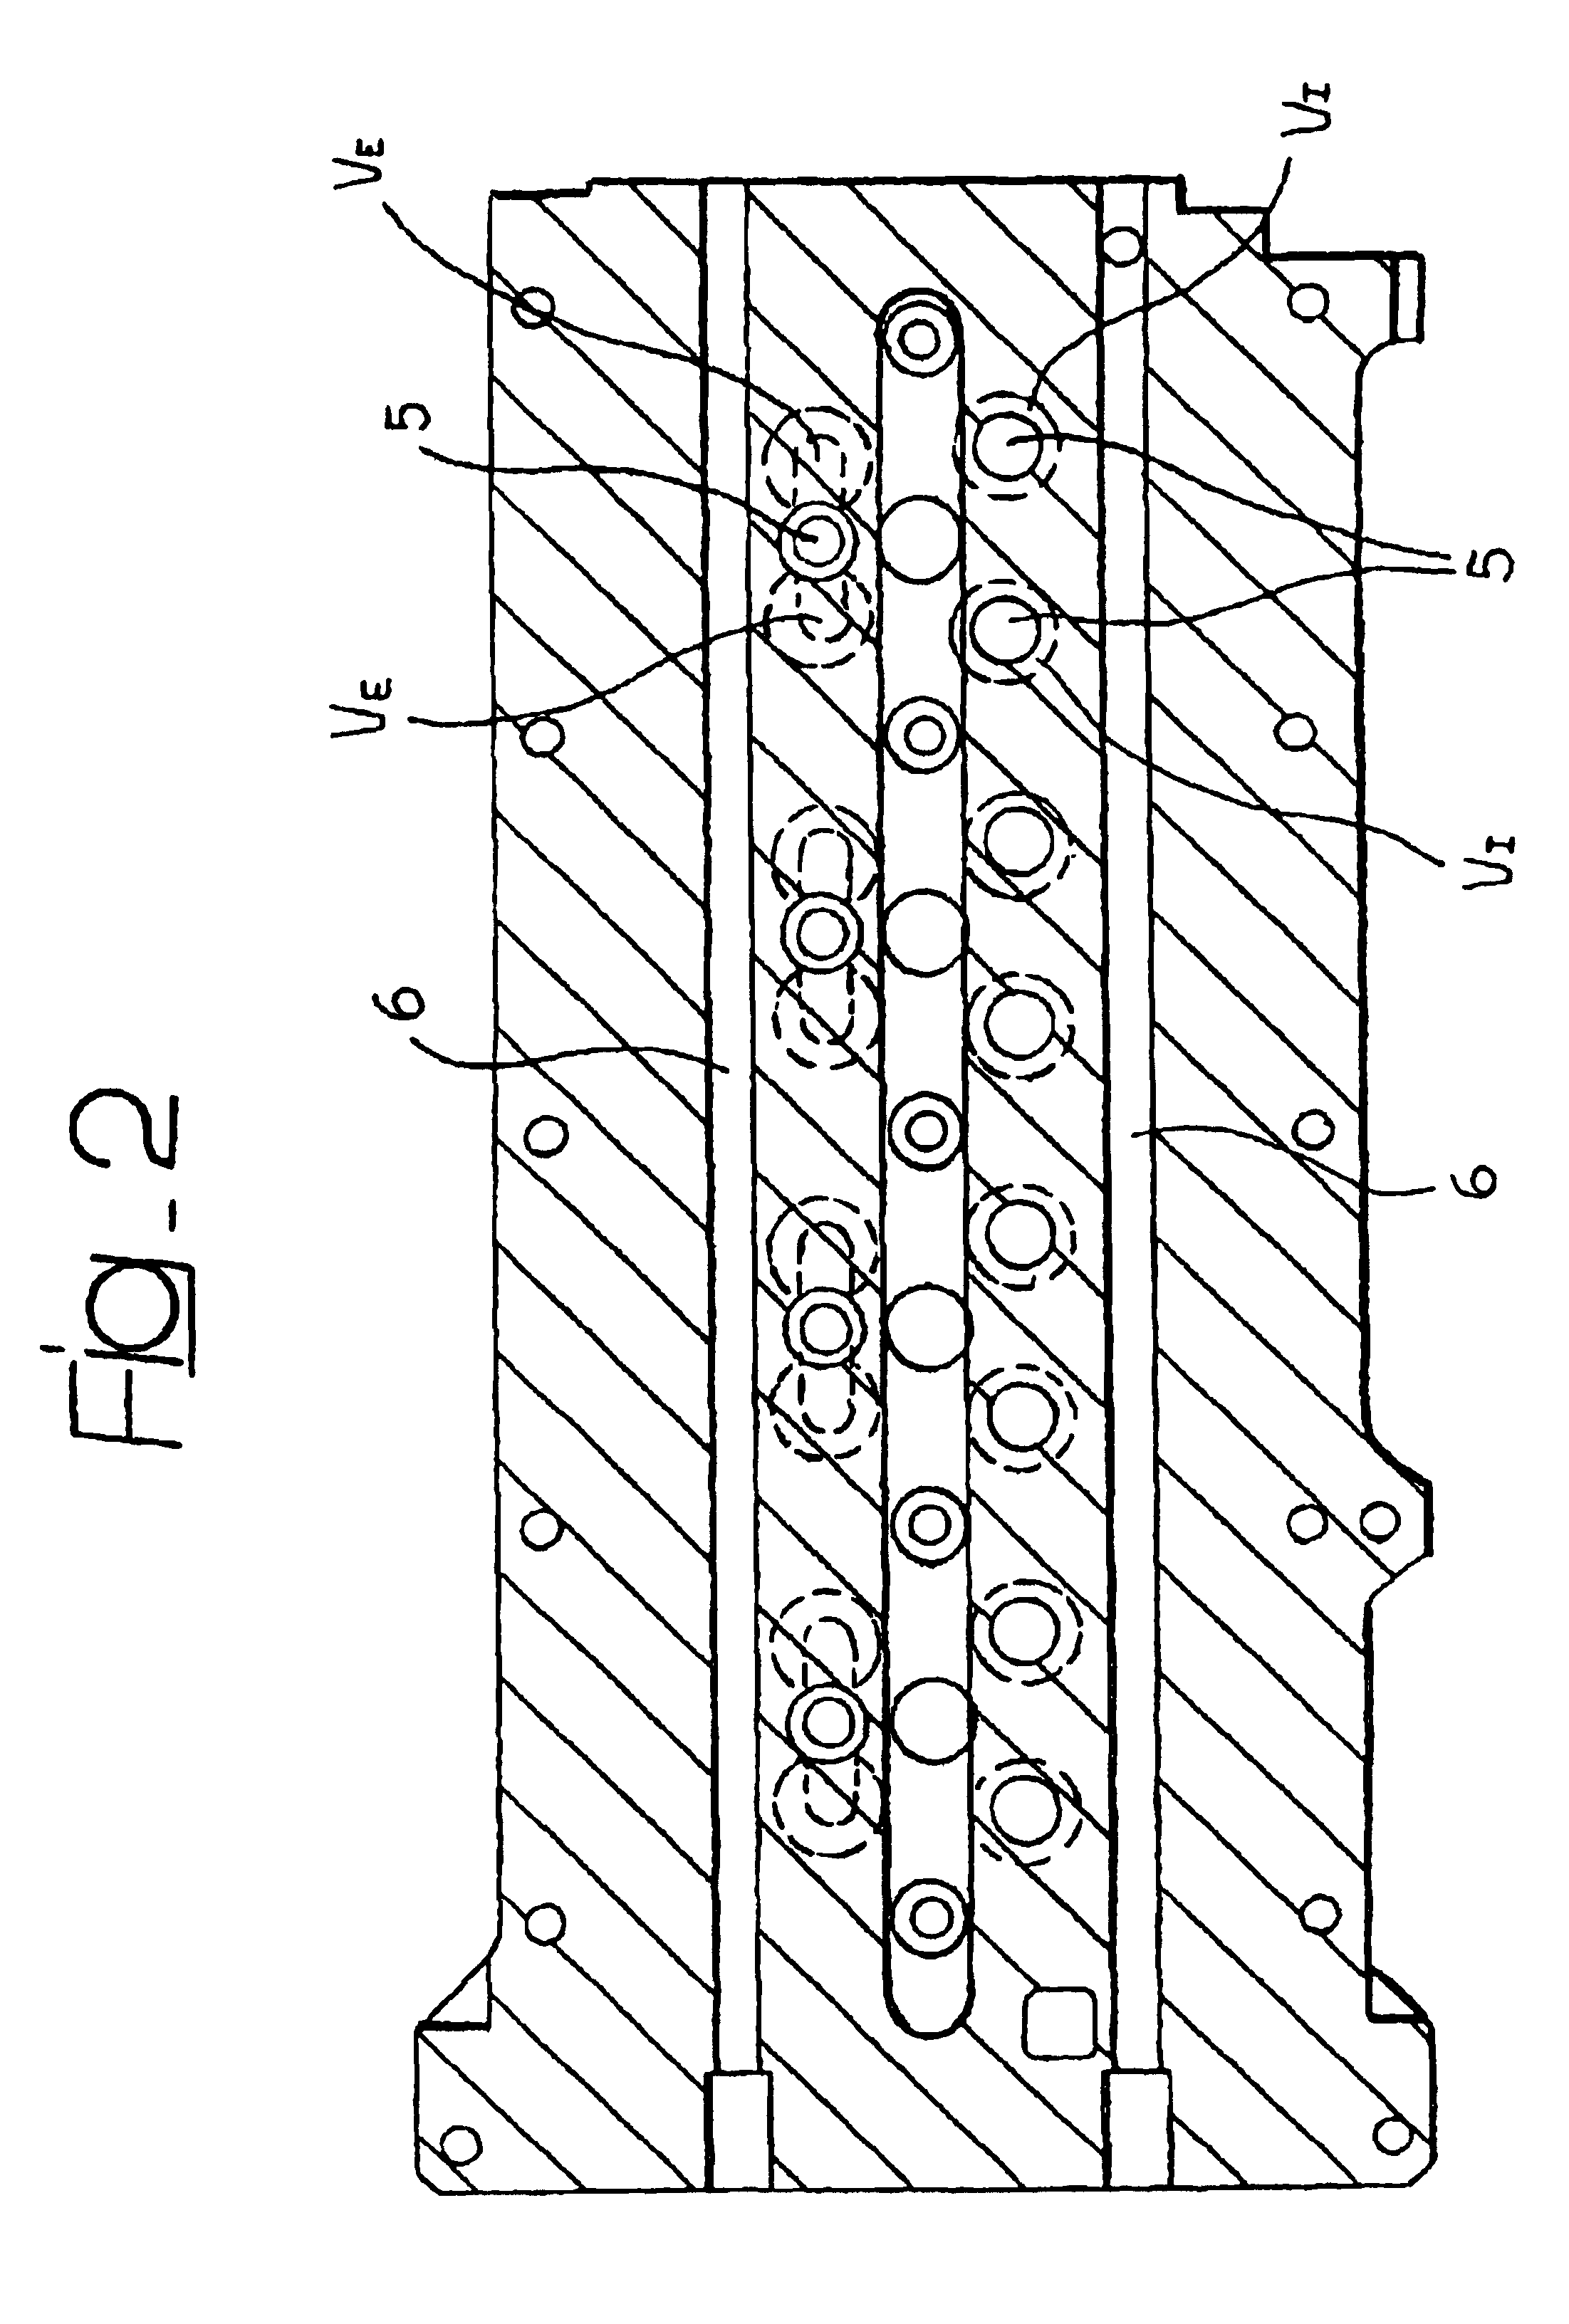 Multi-cylinder diesel engine with variably actuated valves